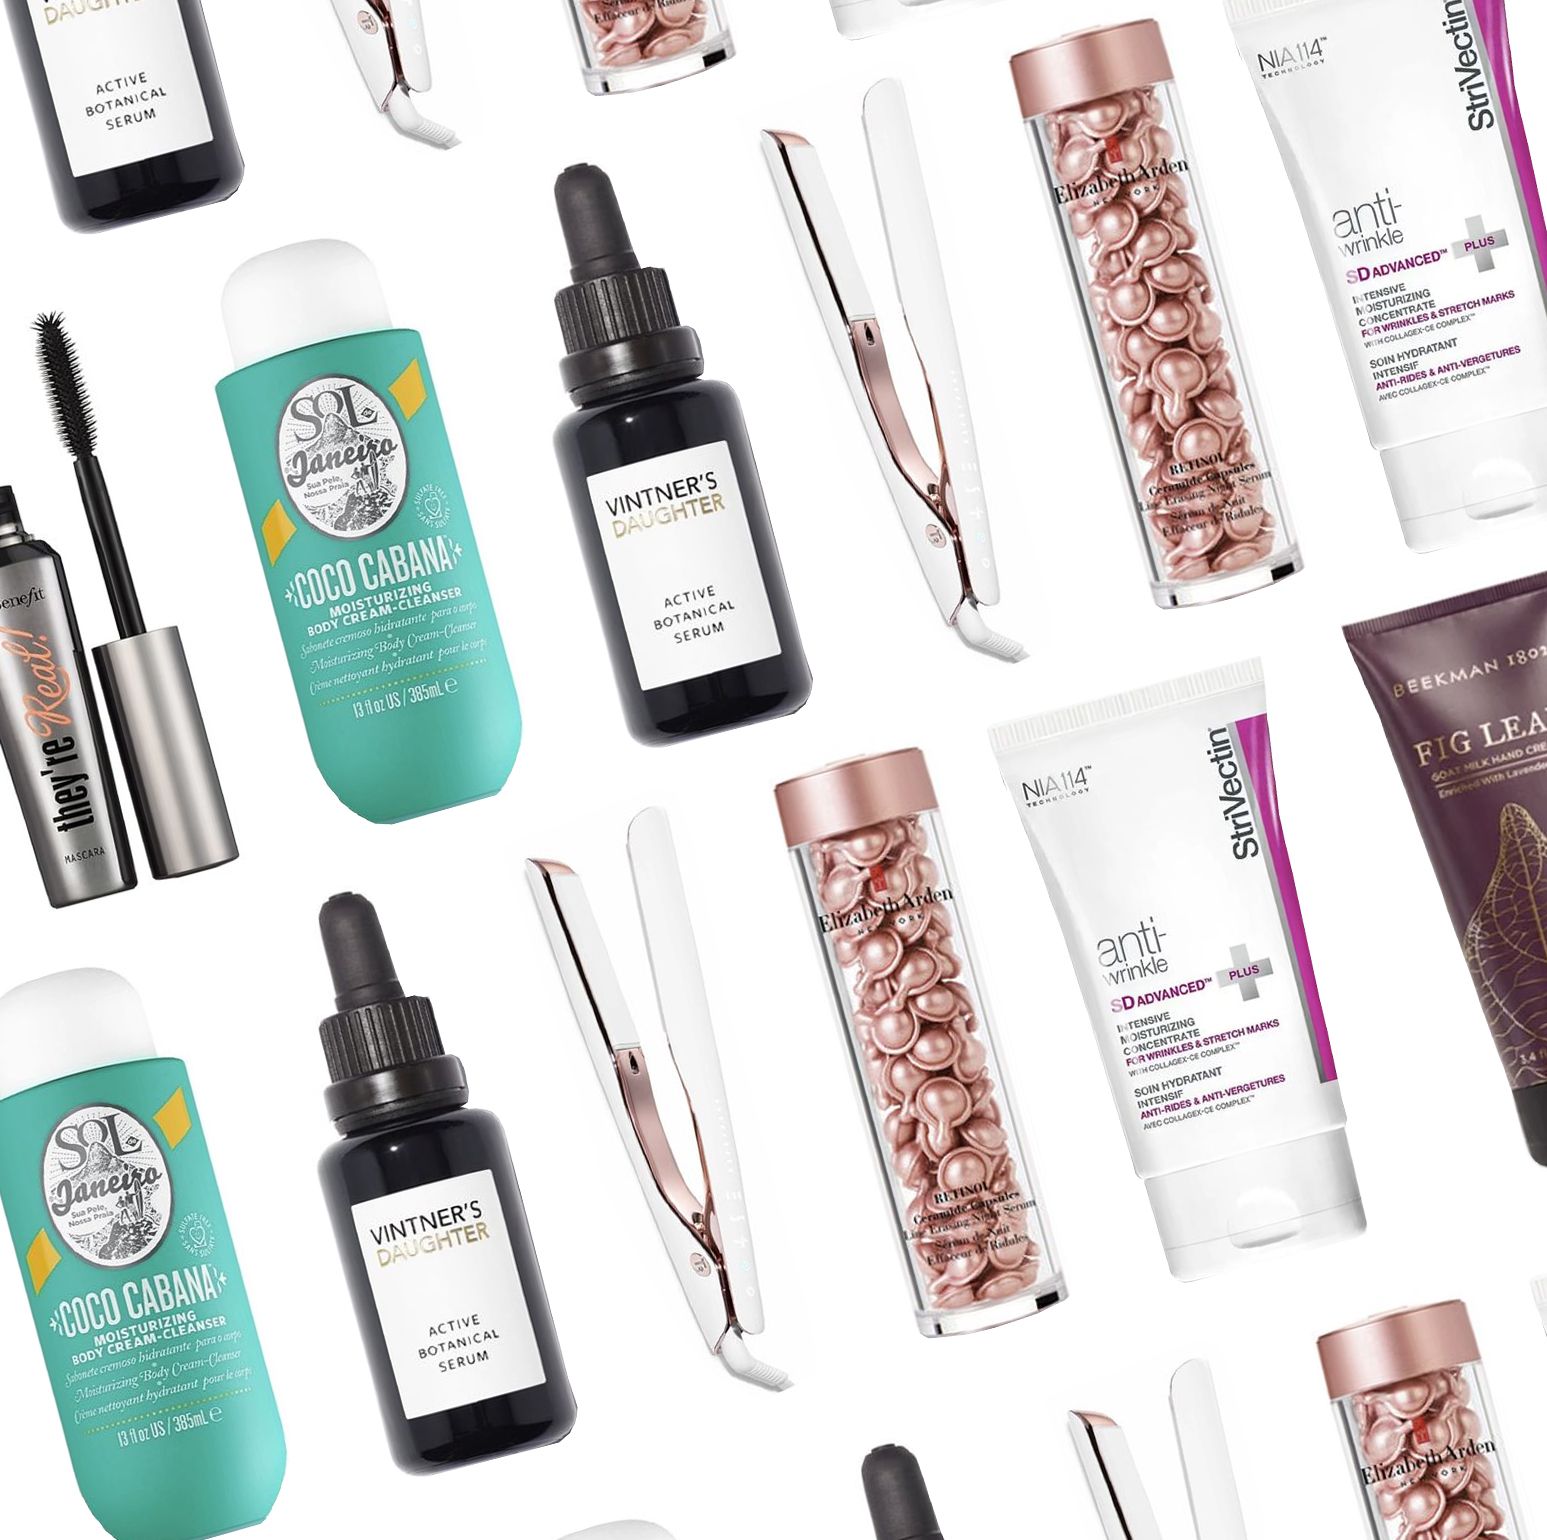 The Best Beauty Deals from Black Friday and Cyber Monday